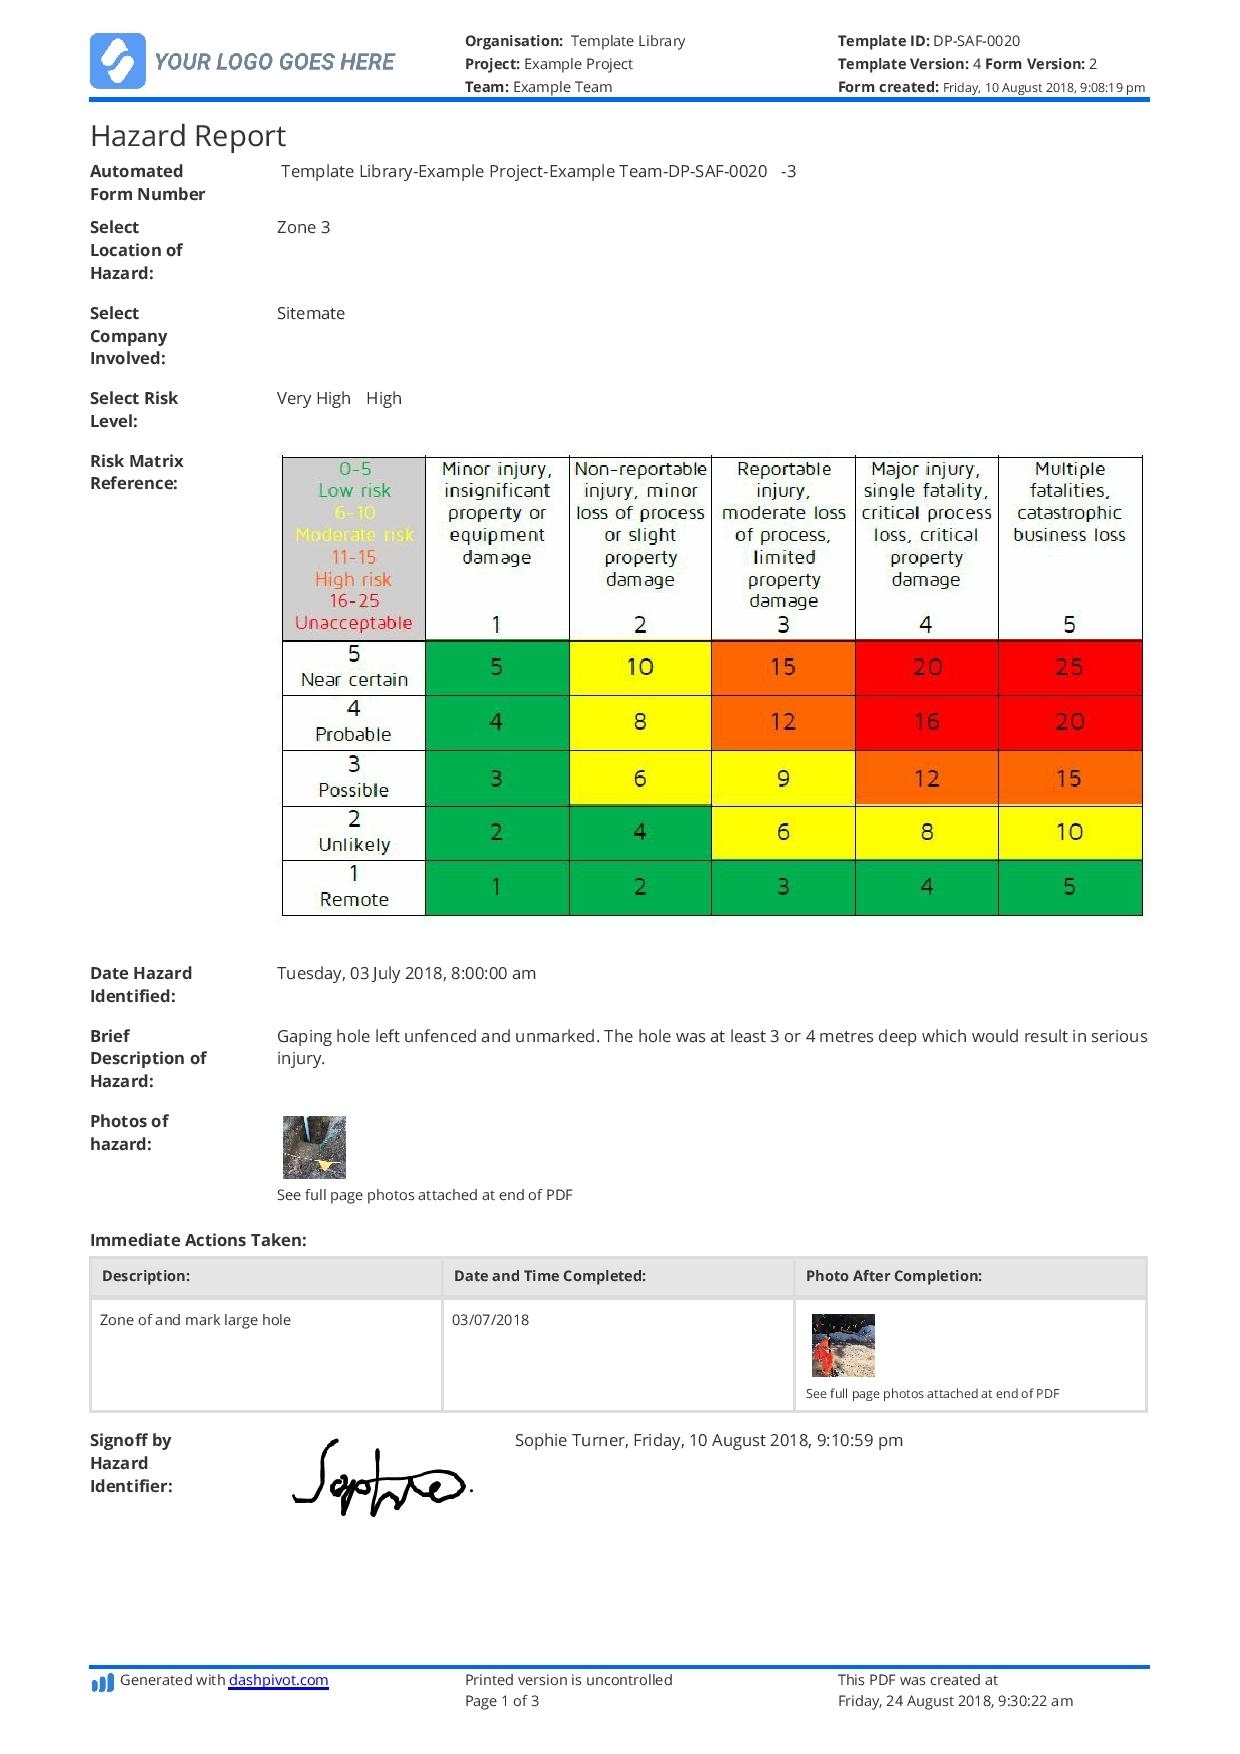 Incident Report Template Itil – New Creative Template Ideas With Itil Incident Report Form Template